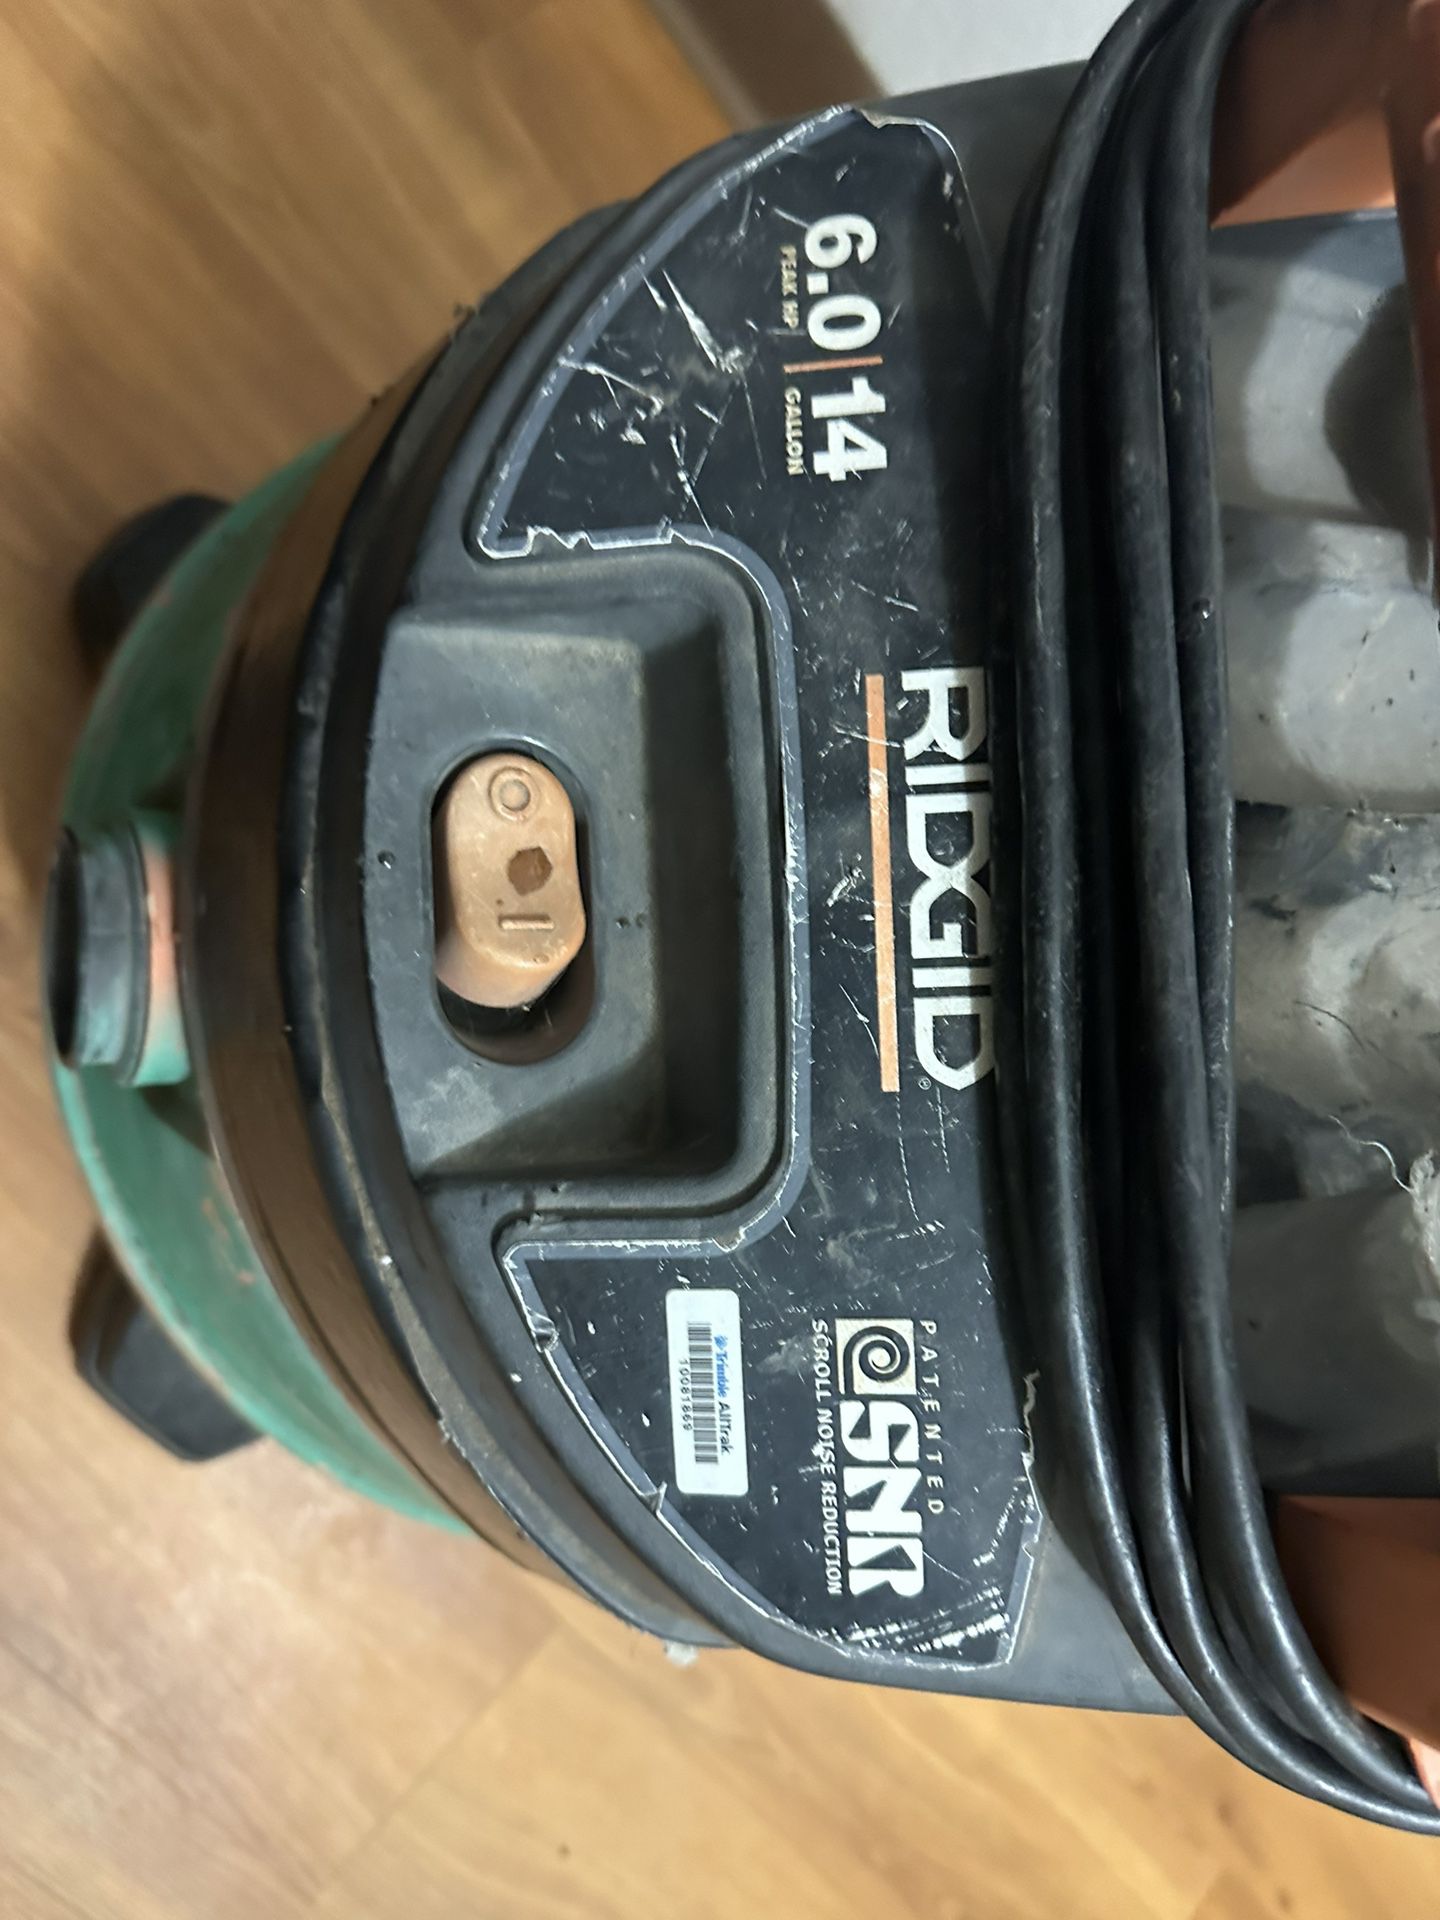 Rigid 6.0, Shop Vac With Two Hoses And Accessories